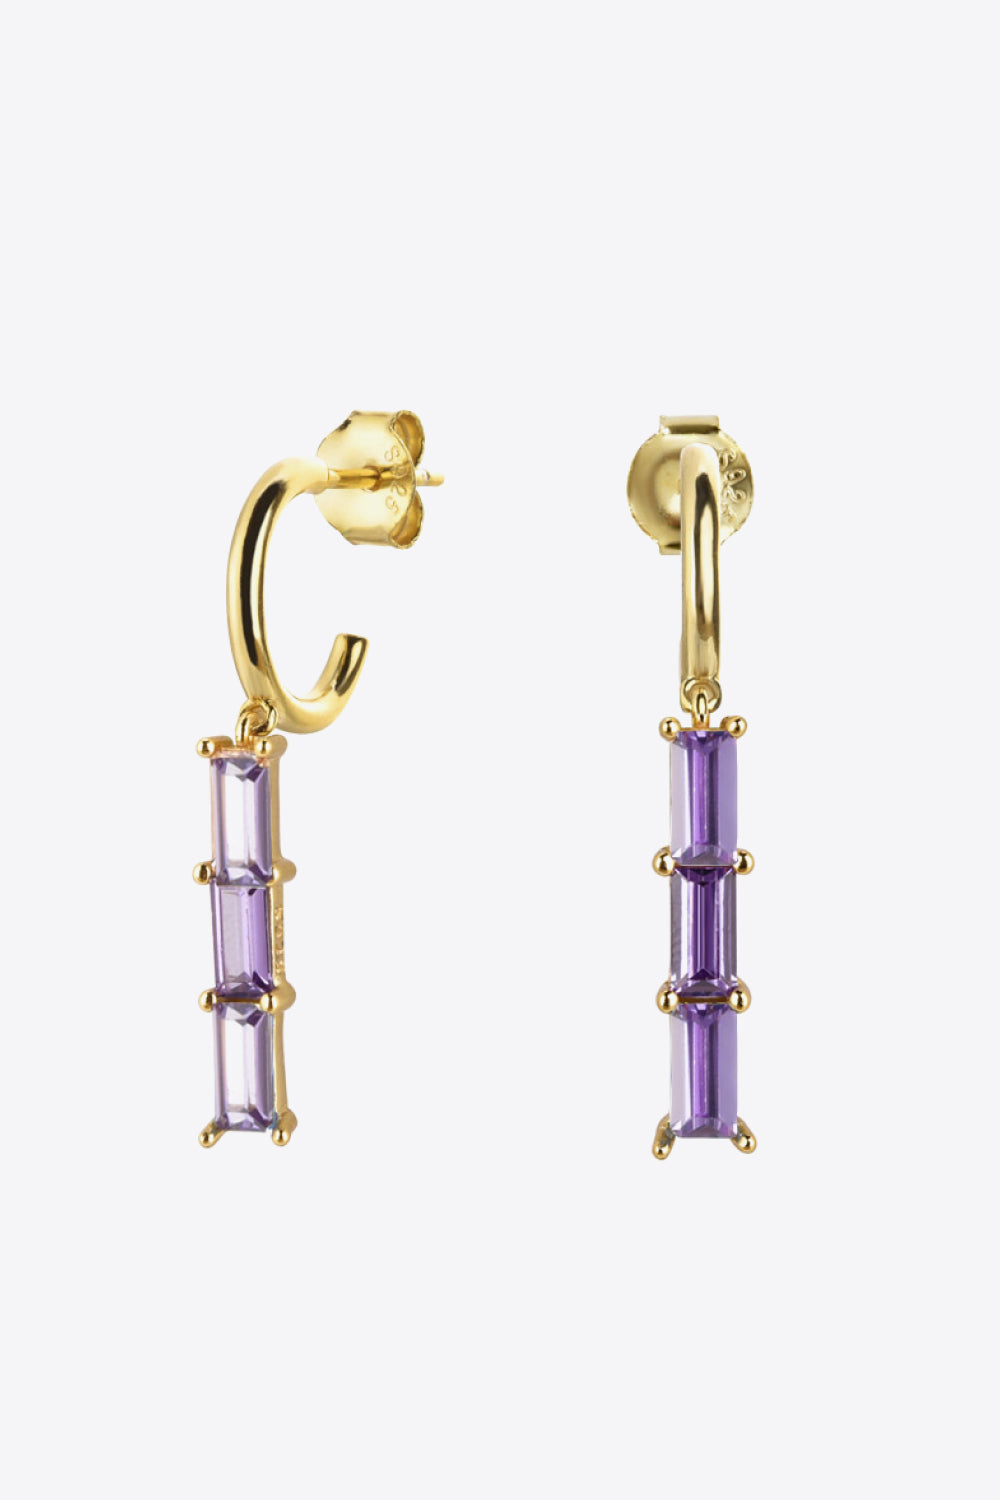 GOLD/PURPLE ONE SIZE - Inlaid Zircon 925 Sterling Silver Earrings - 7 colors - earrings at TFC&H Co.